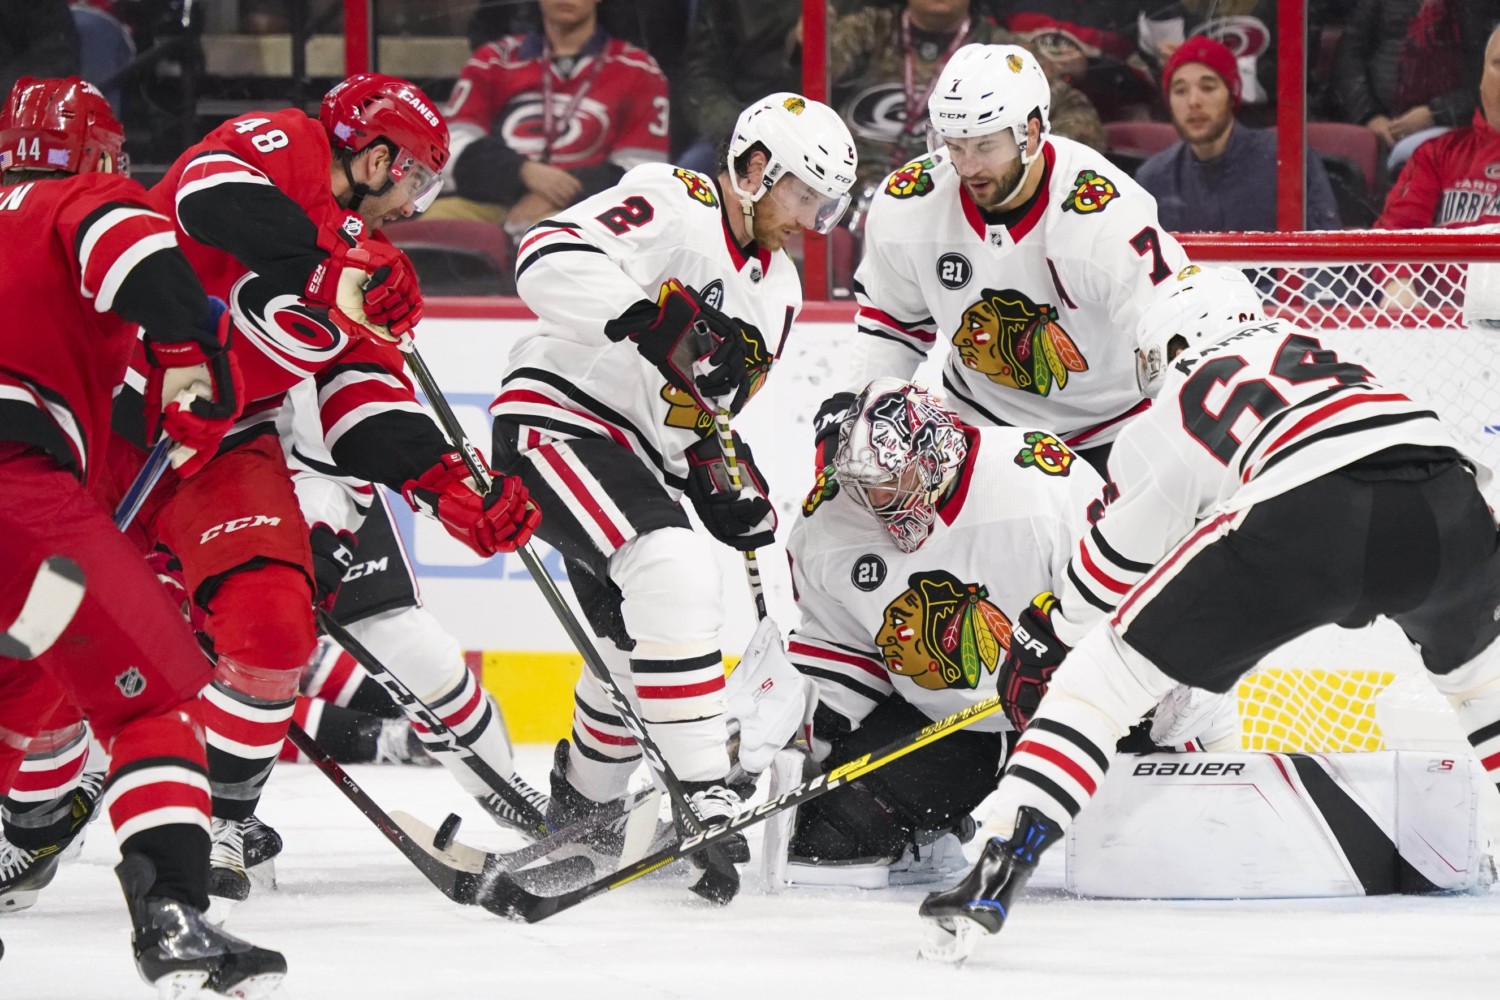 Duncan Keith said he hasn't been asked to waive his NMC, a report that Brent Seabrook said "No" to waiving his.